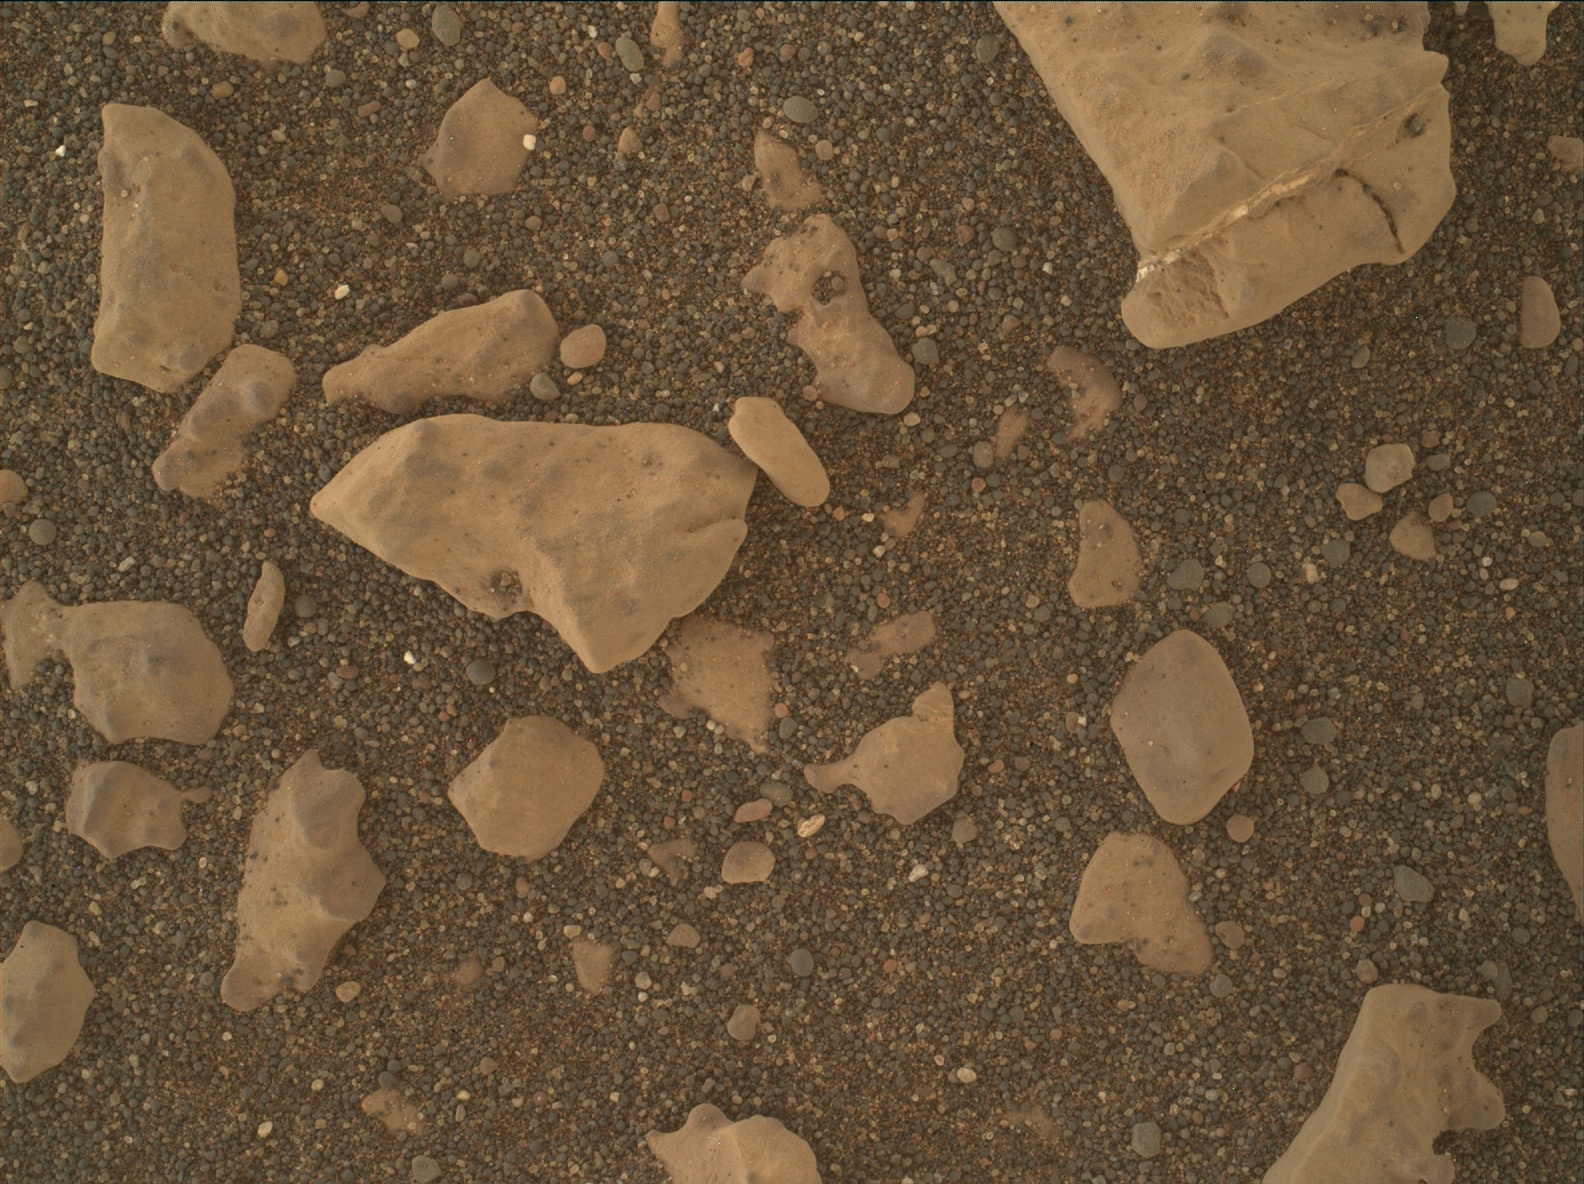 Nasa's Mars rover Curiosity acquired this image using its Mars Hand Lens Imager (MAHLI) on Sol 3036